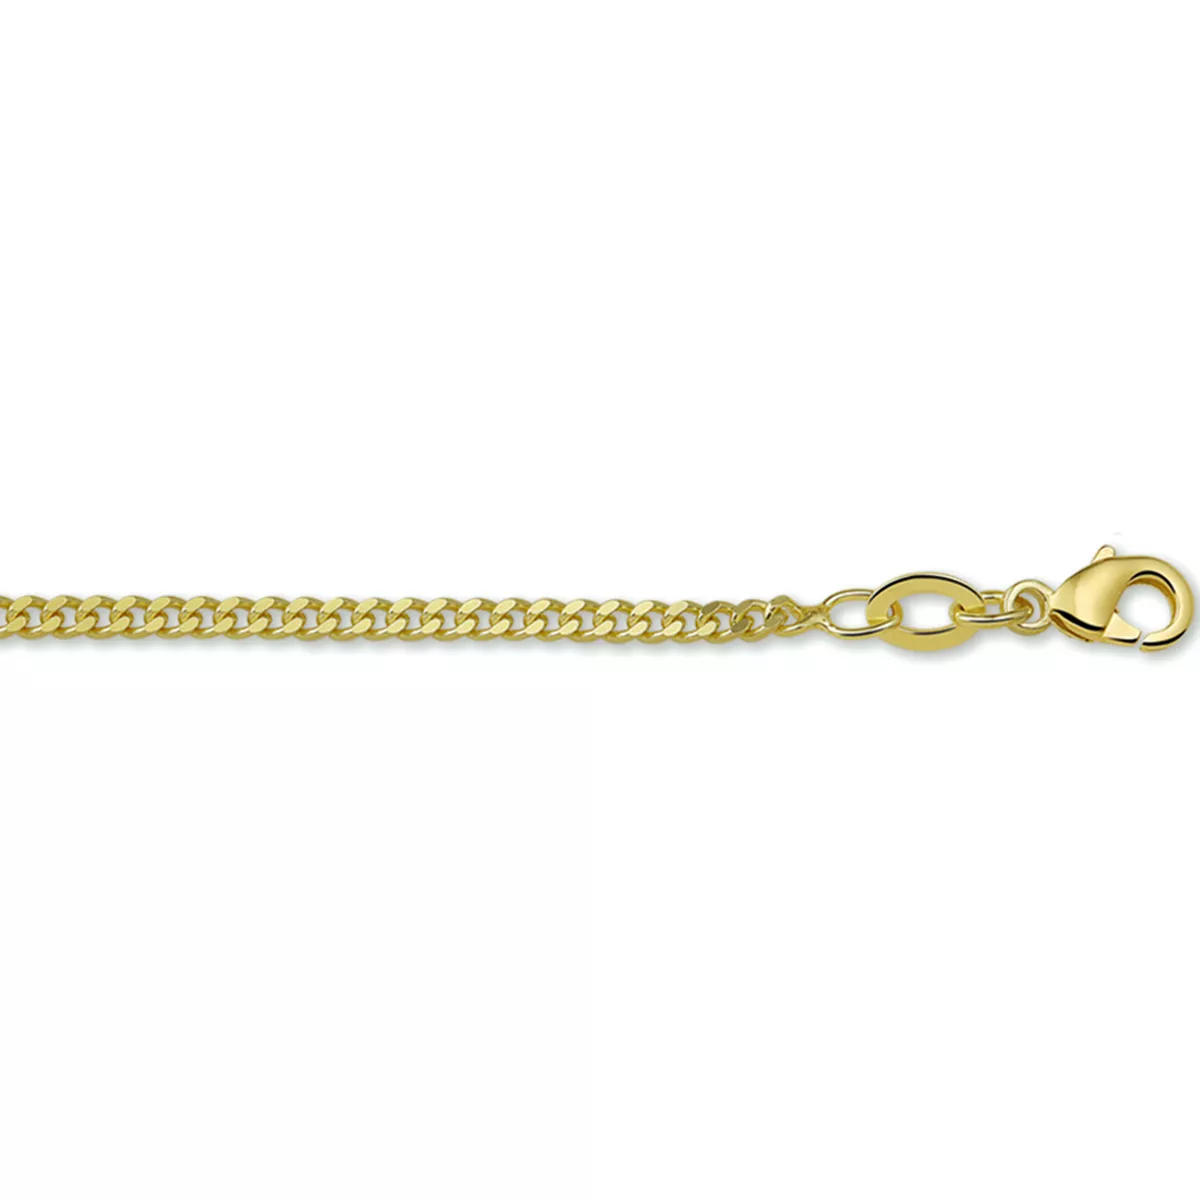 Ketting Doubl Gourmette 2,1 mm